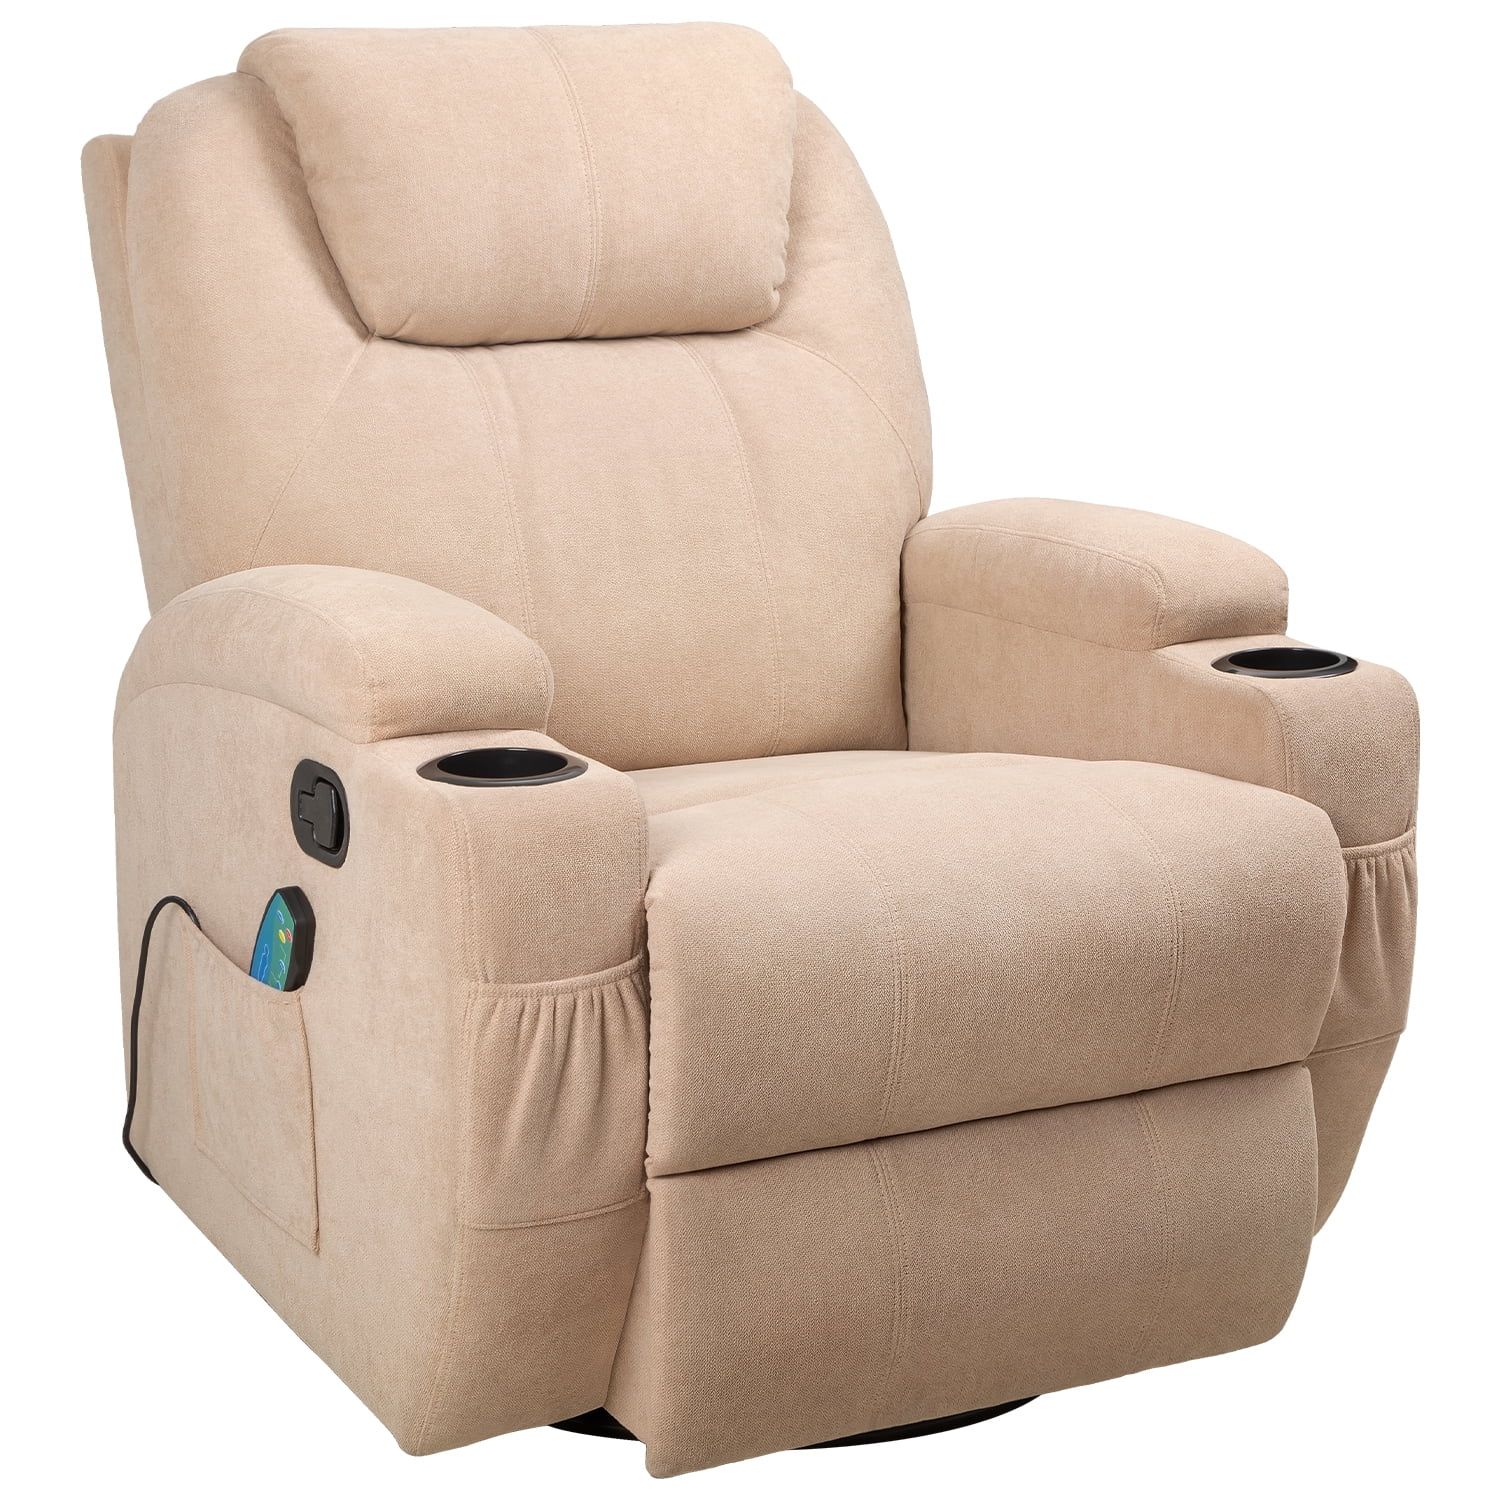 Lacoo swivel heated massage recliner with large headrest and thick armrests, beige | Walmart (US)